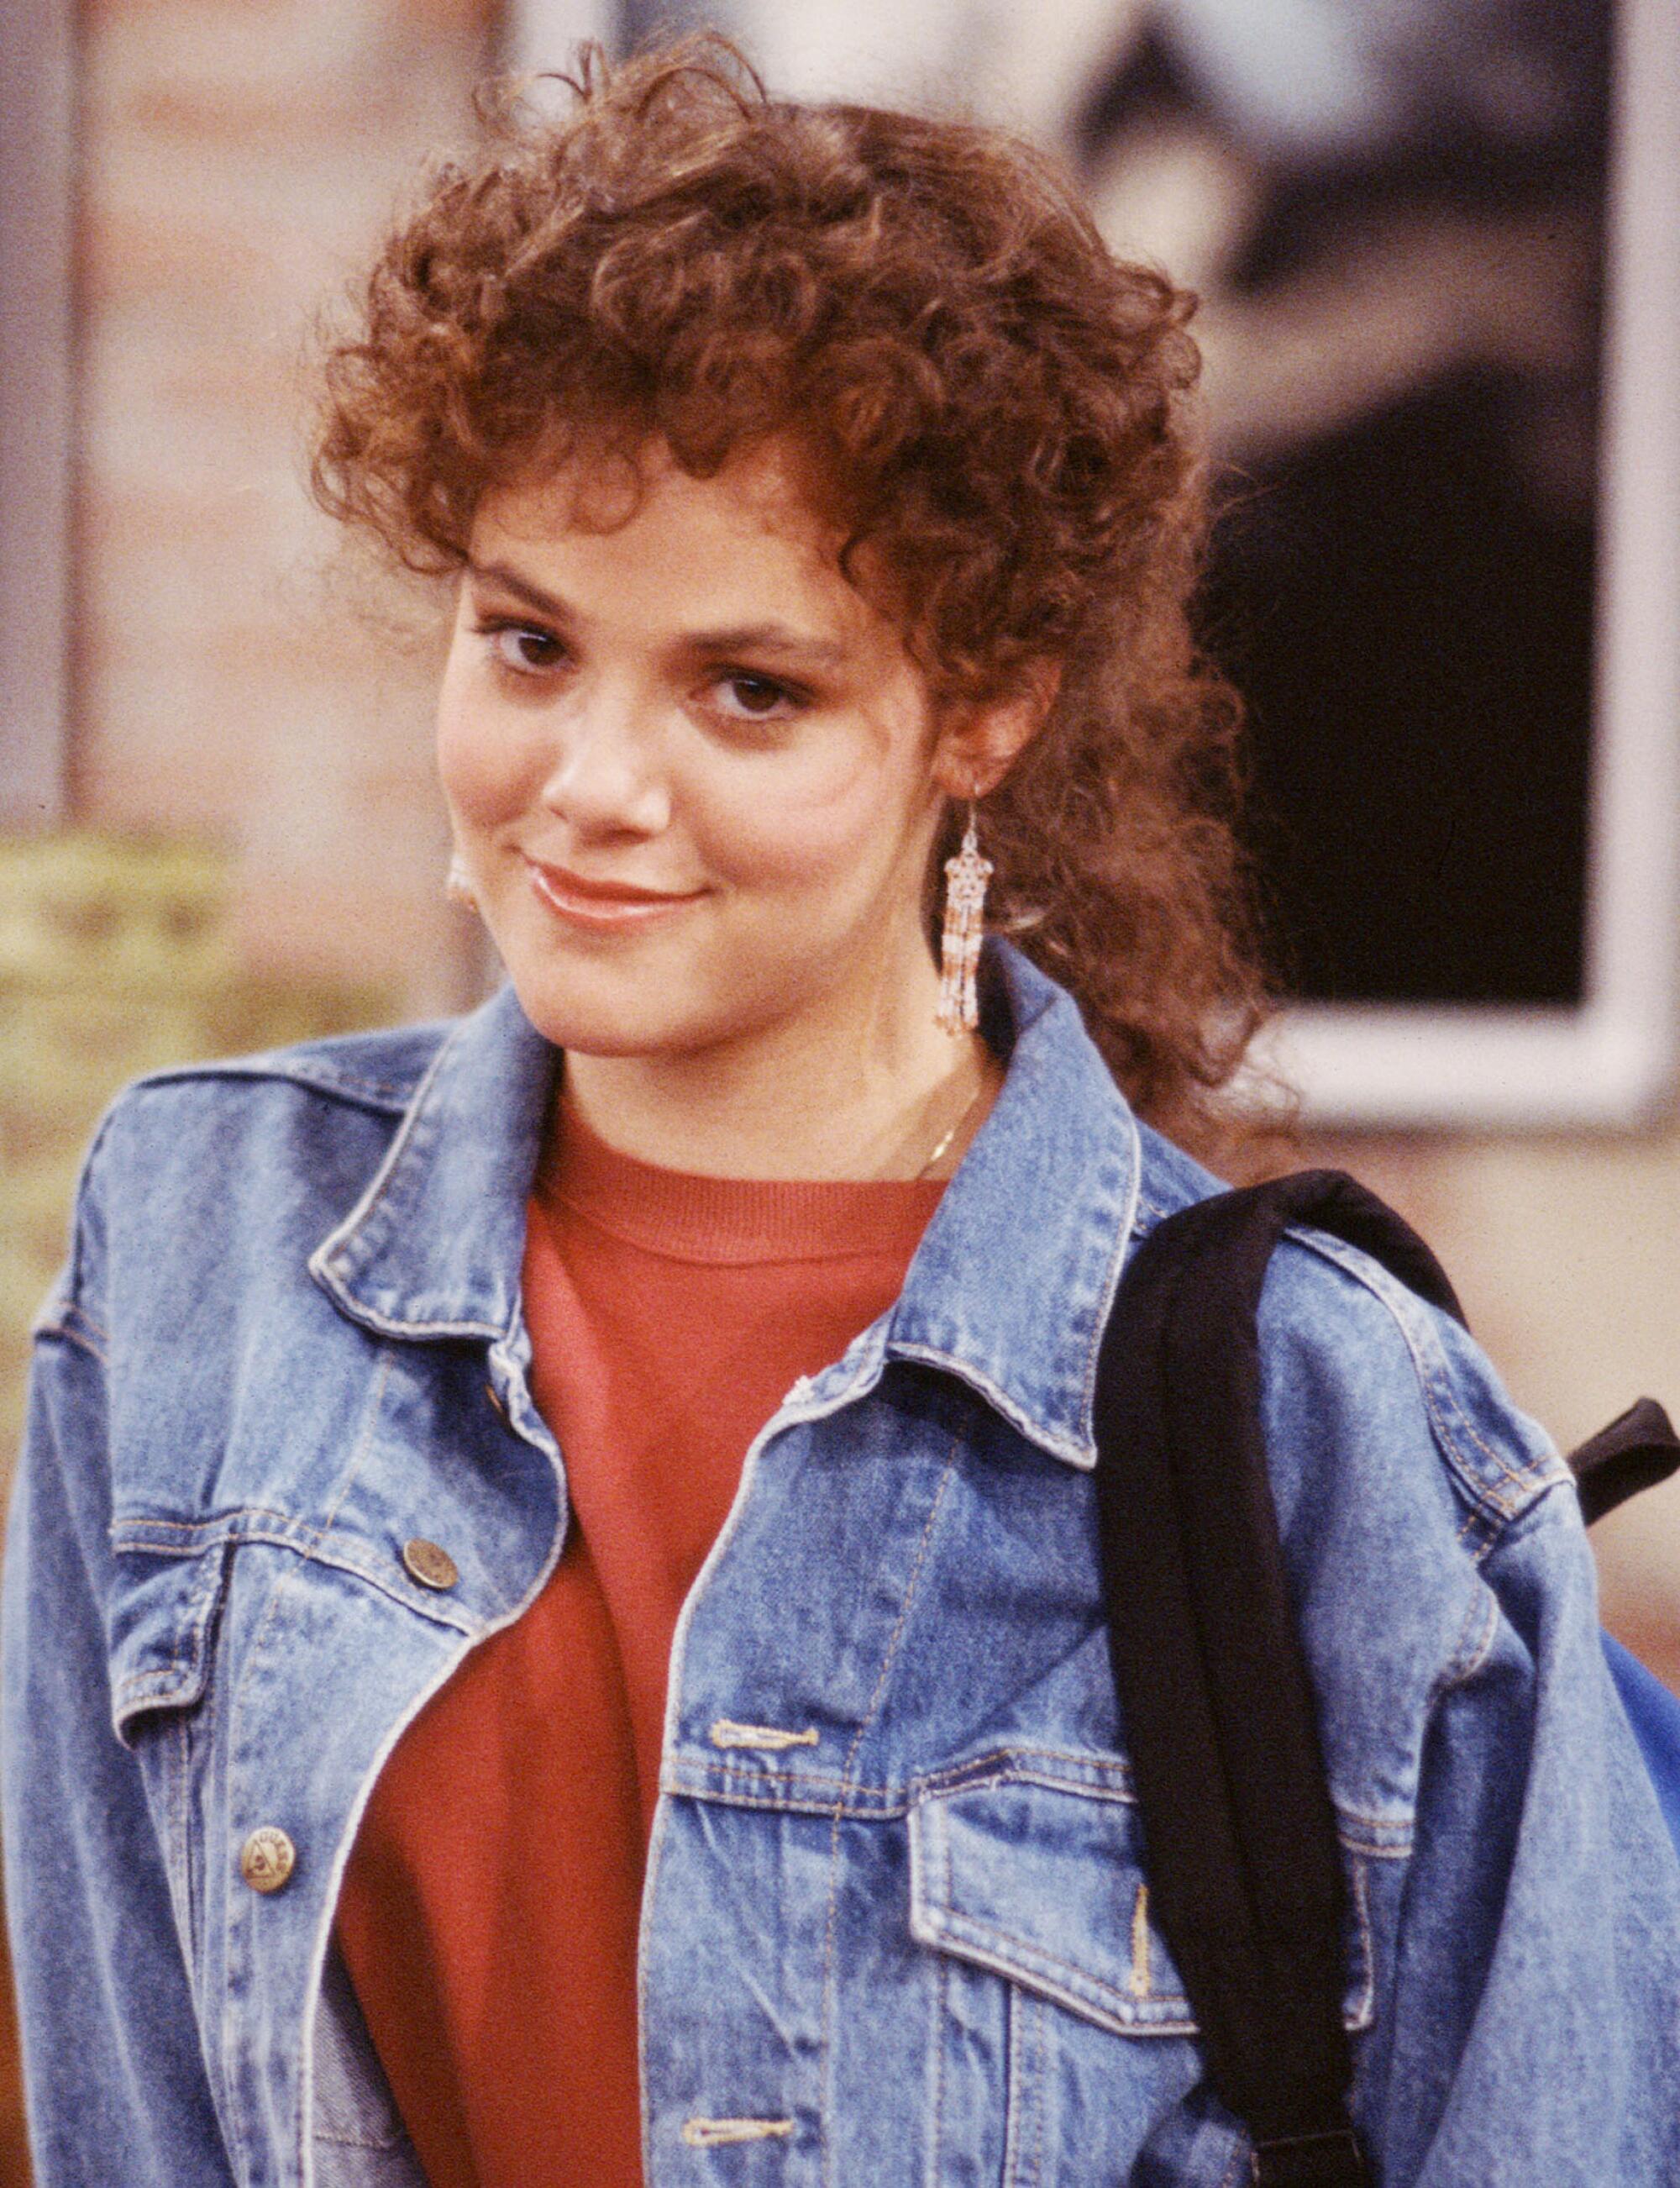 A woman with curly hair and a denim jacket.